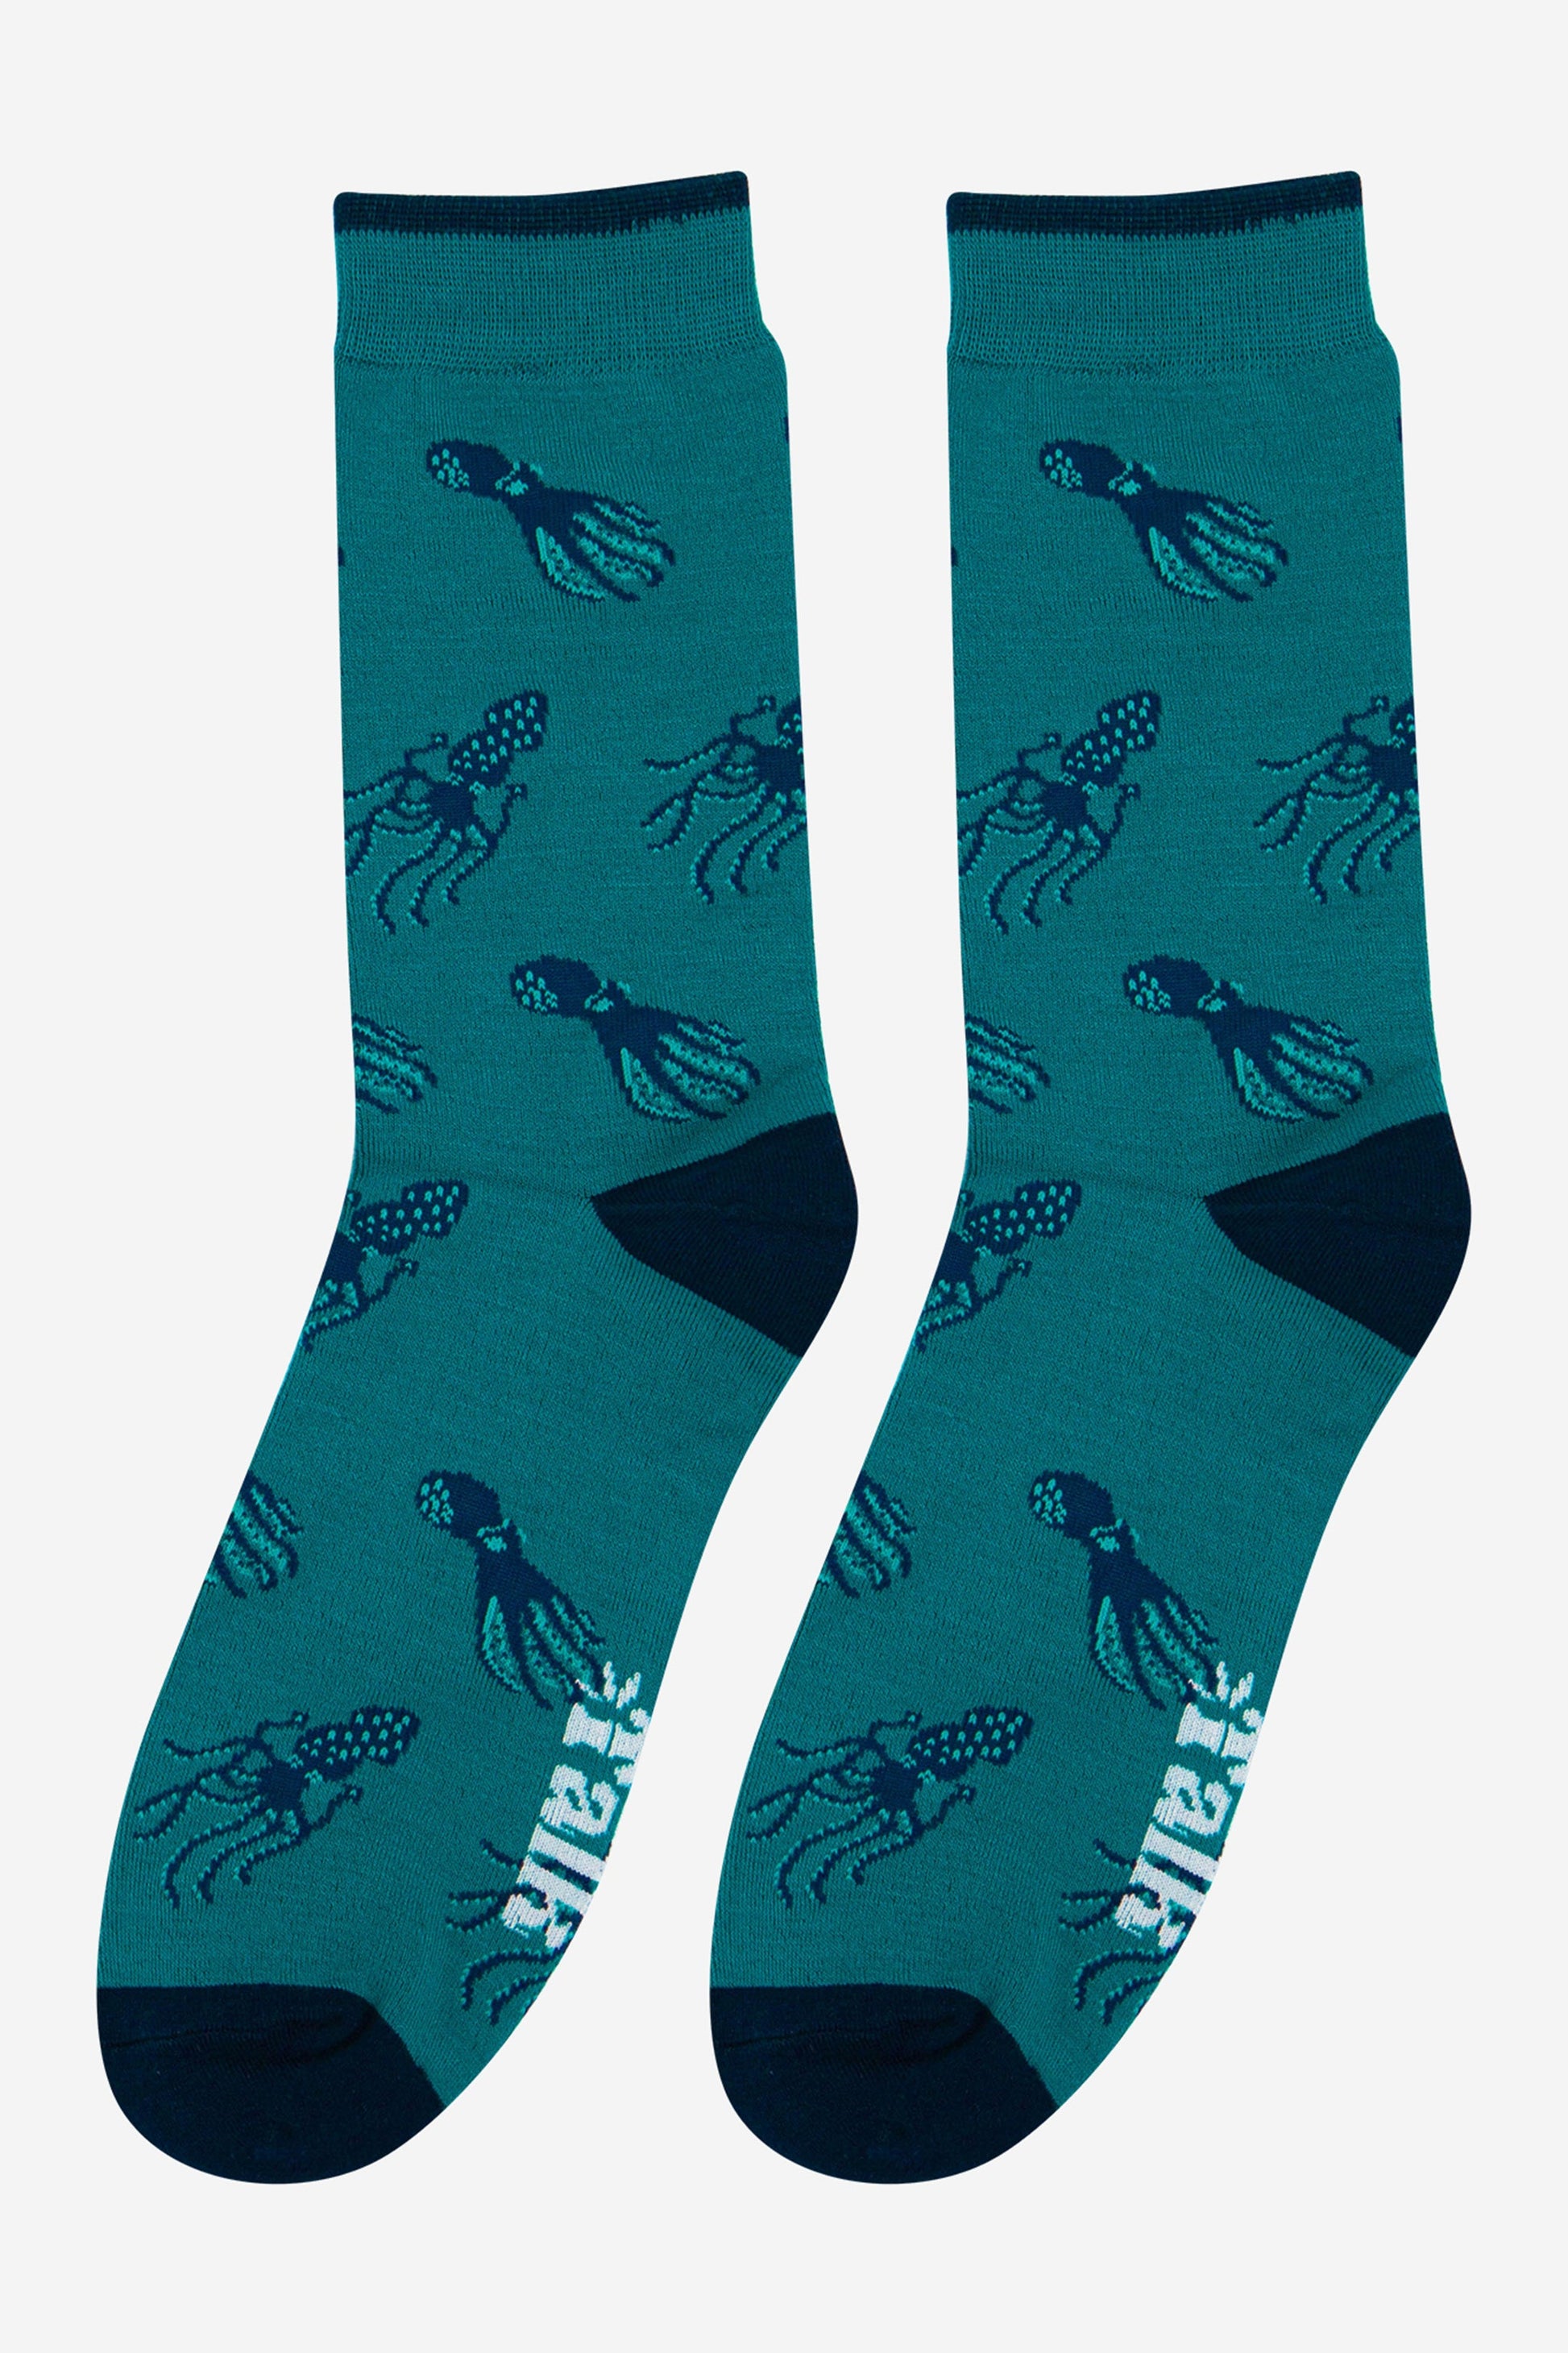 teal and navy blue mens bamboo socks with a pattern of octopus and squid